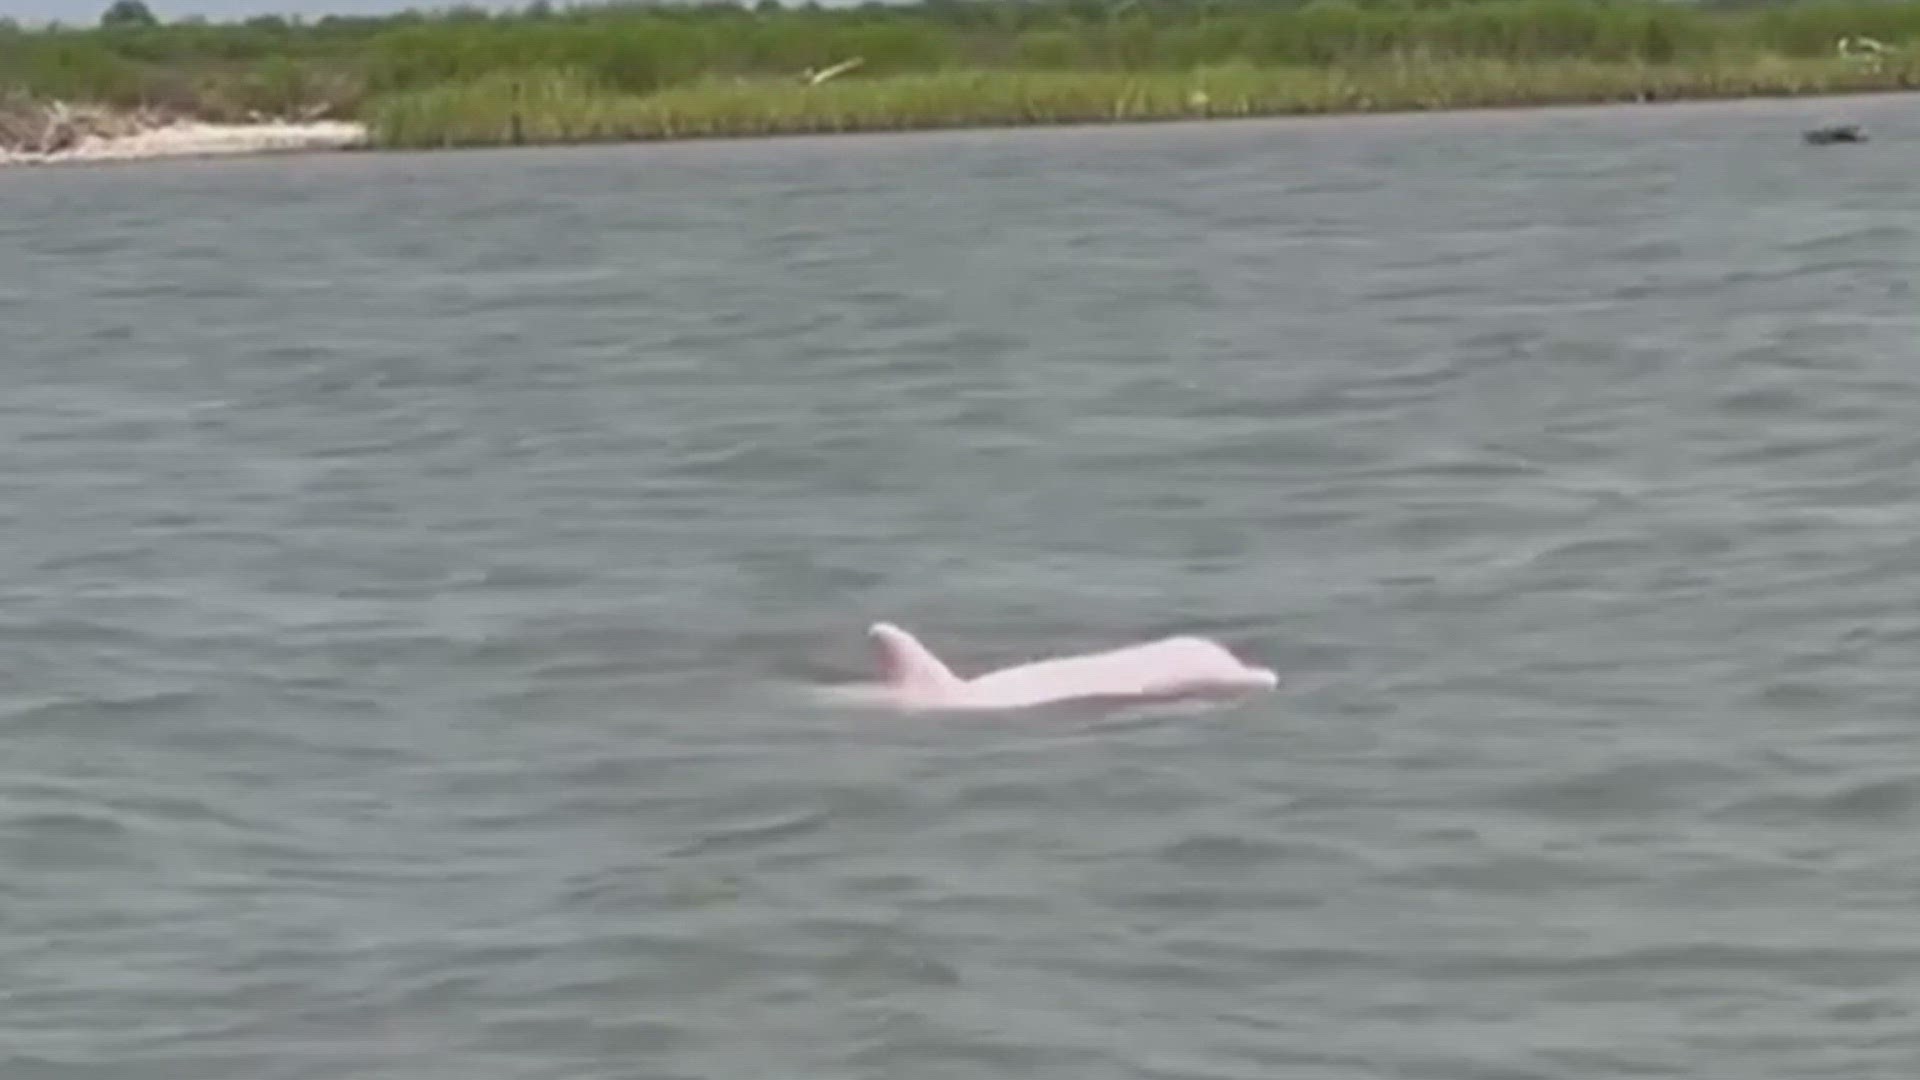 Thurman Gustin was fishing in Louisiana with his girlfriend when they spotted the dolphin, which may be the one locals have nicknamed 'Pinky.'